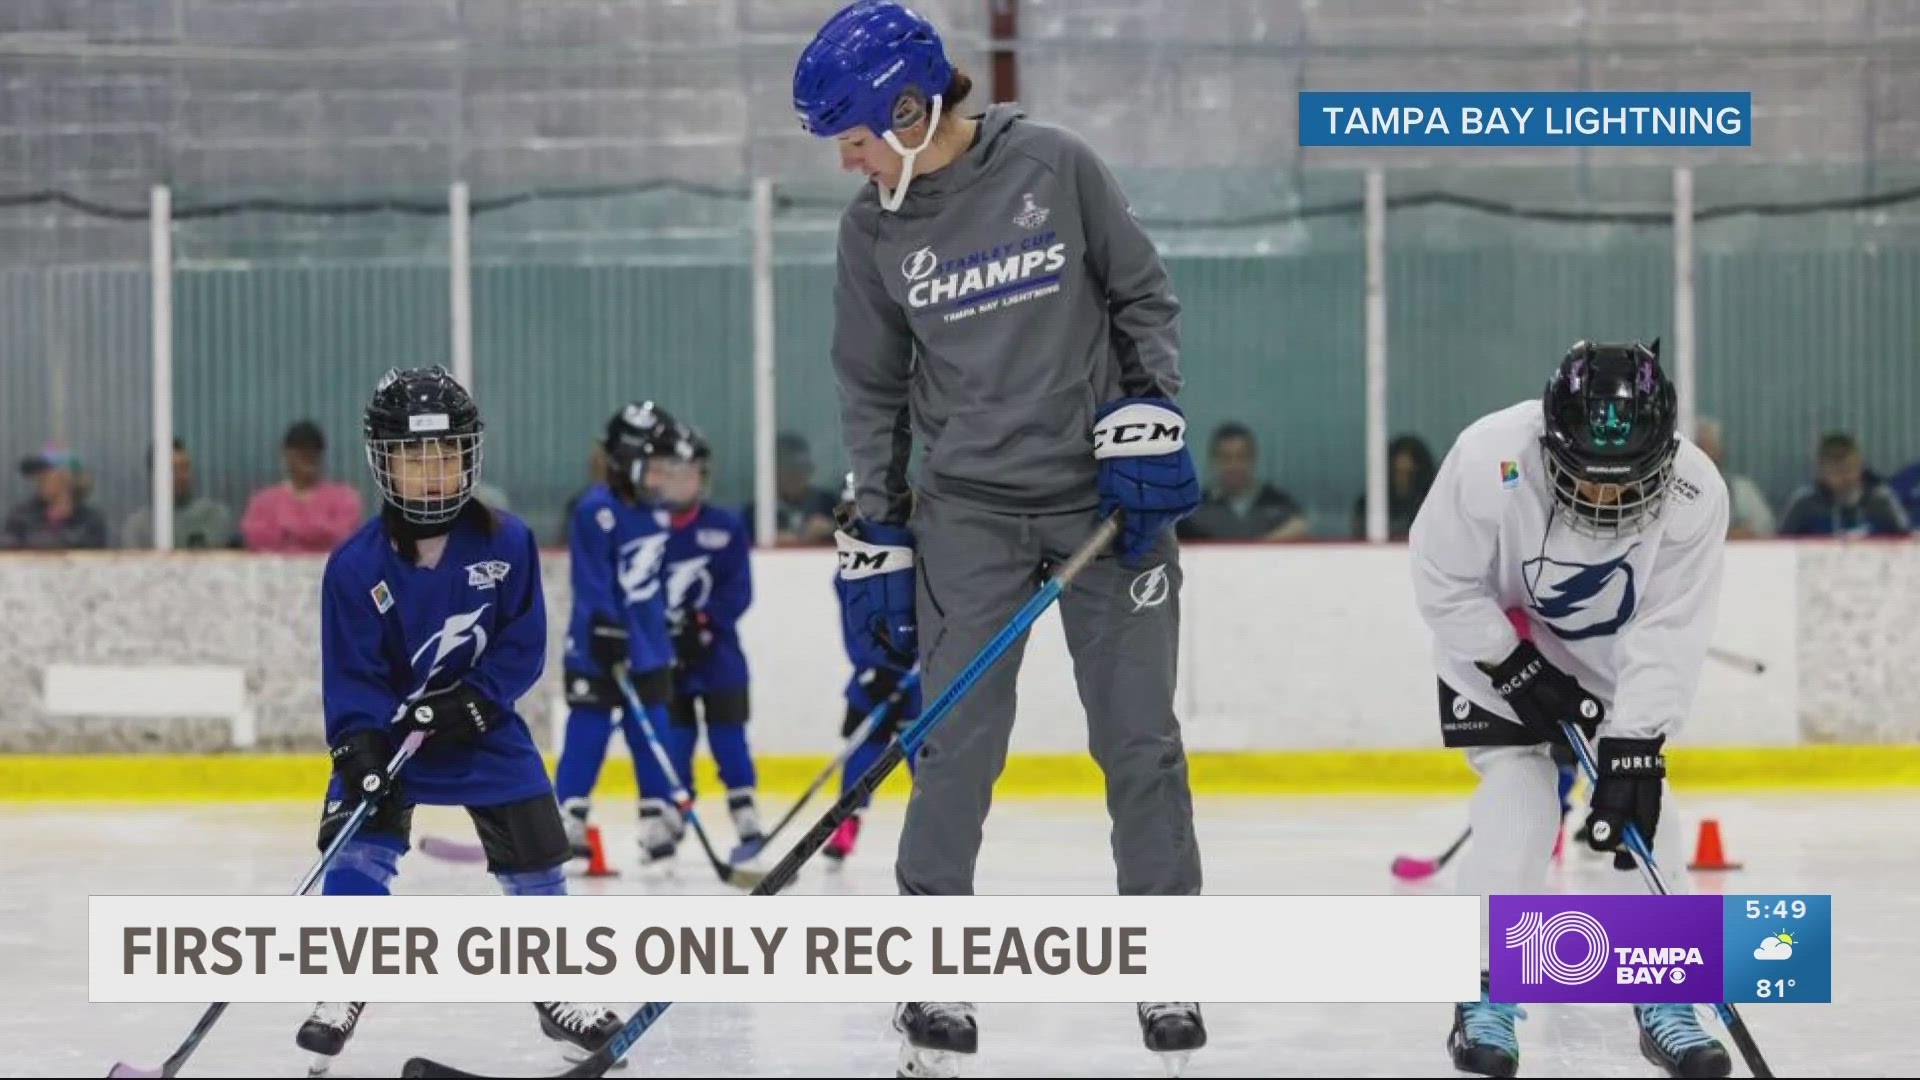 The league will consist of 30 girls from ages 7 to 10 and played at the Power Pole Arena in Tampa.